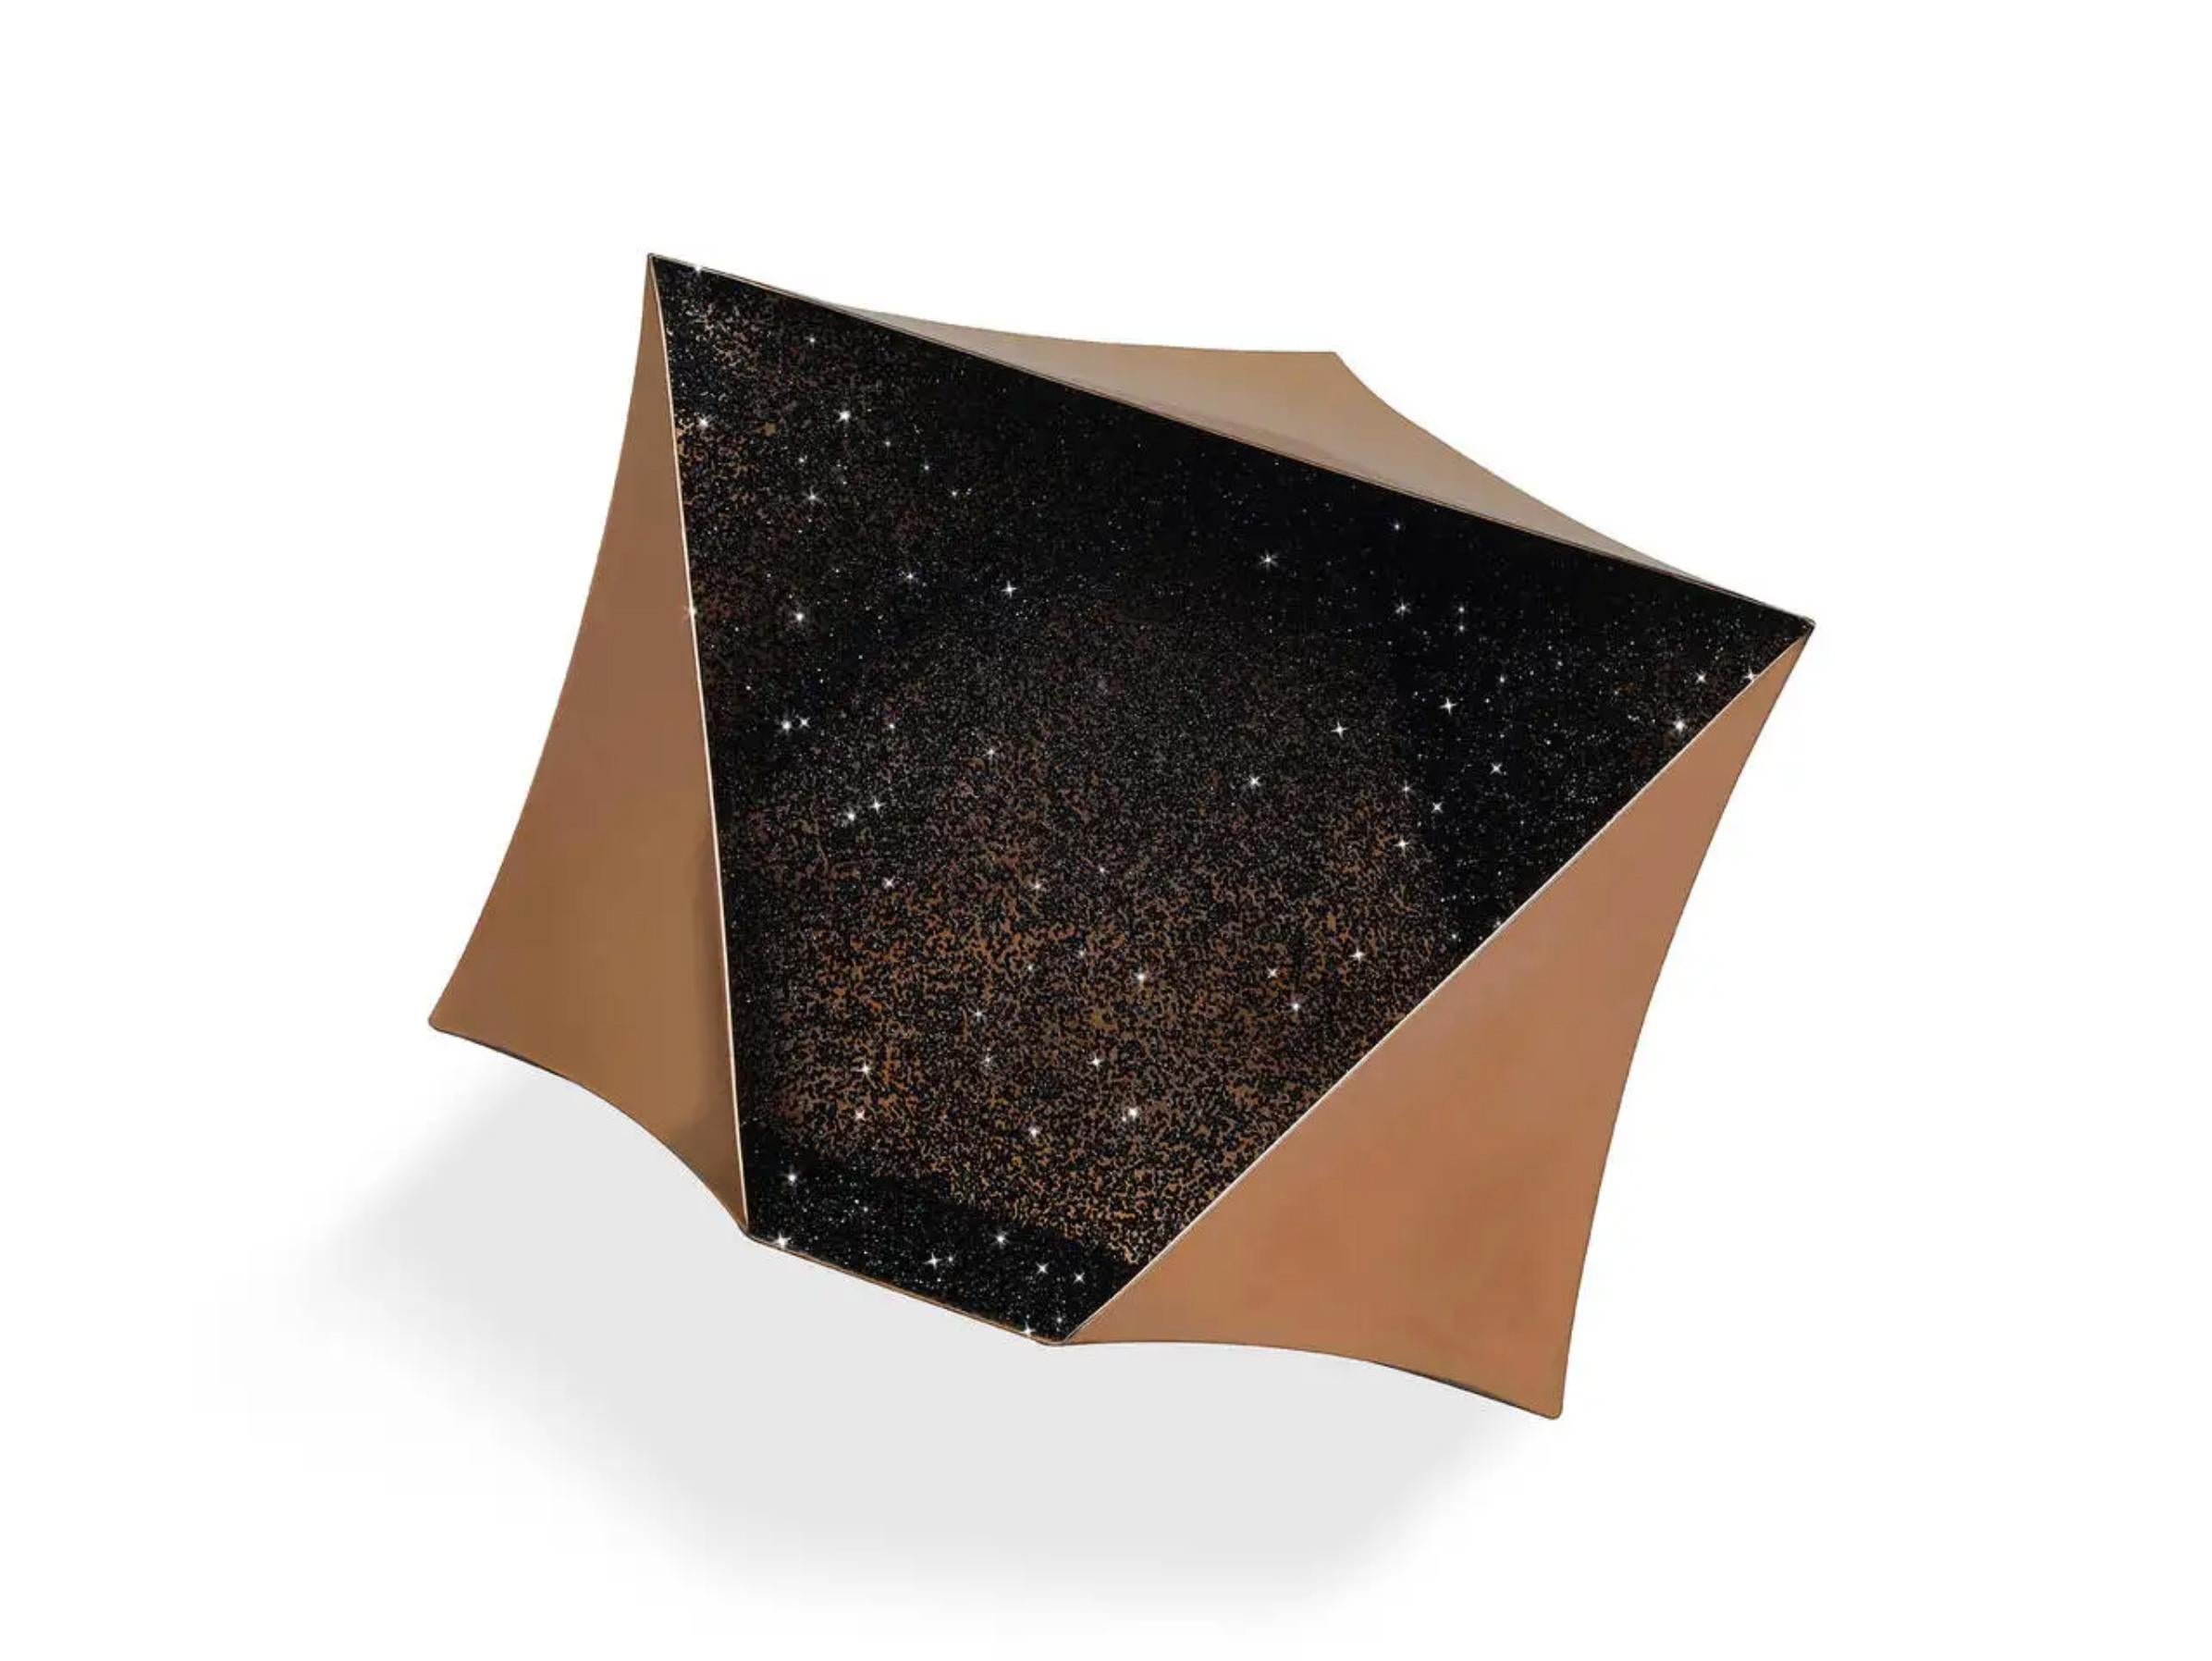 Star is a handmade copper vessel designed by Architect Sir David Adjaye OBE  for GAIA&GINO made in collaboration with Swarovski. This vessel is hand-crafted by  artisans and adorned with black Swarovski crystals inside.

David Adjaye says: